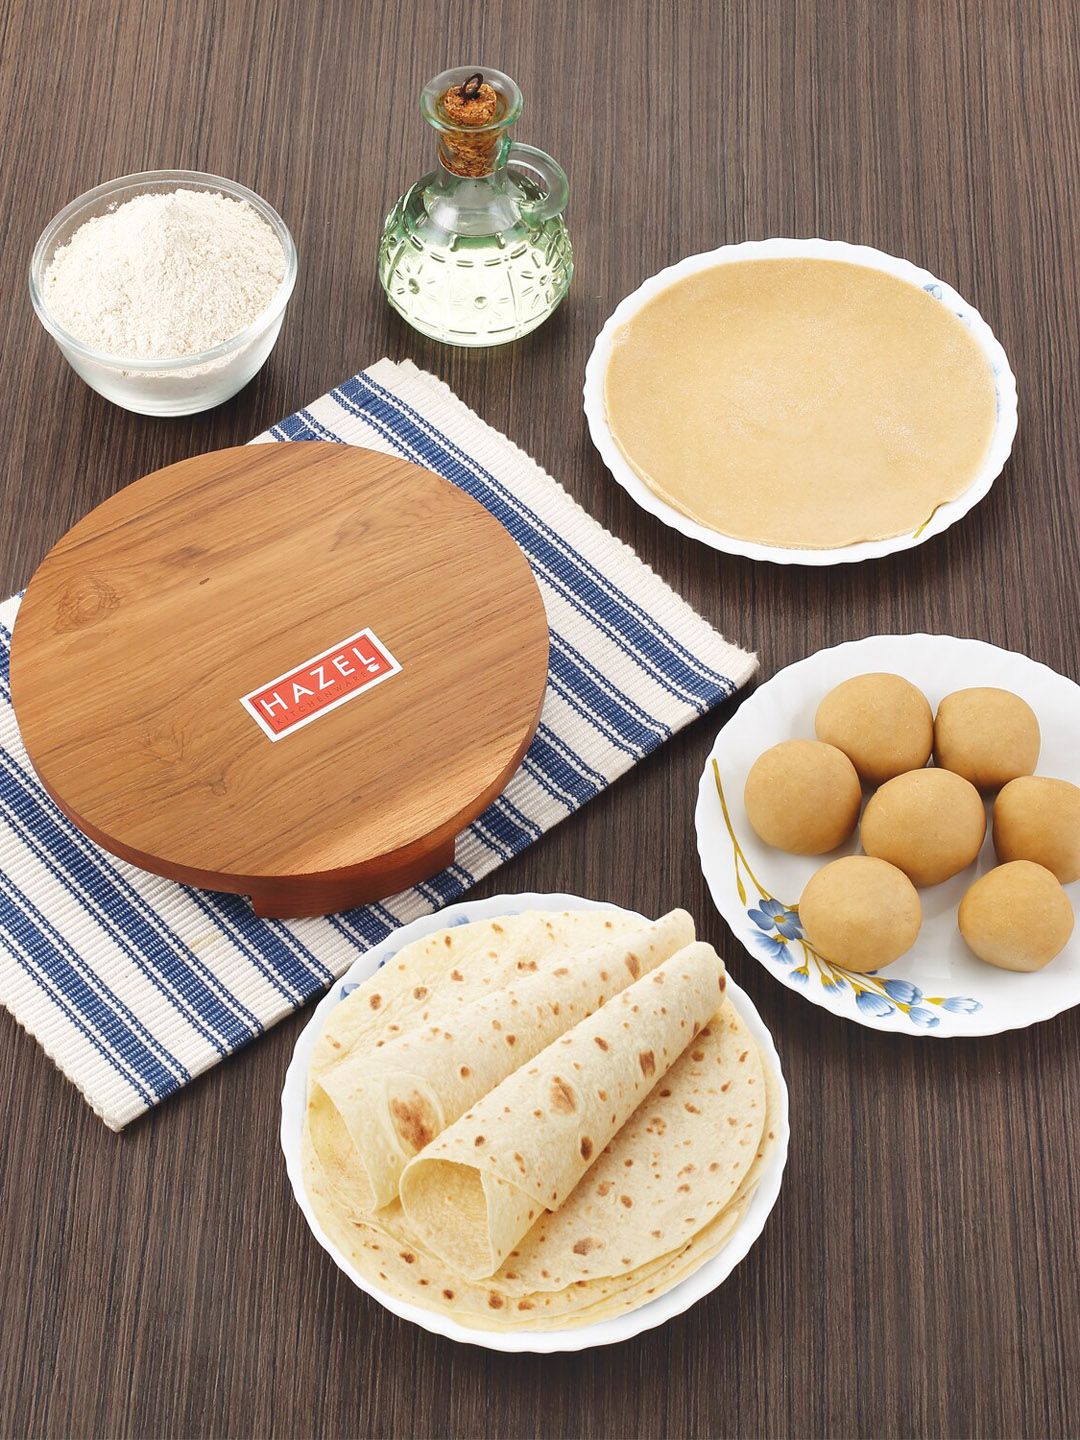 HAZEL Brown Chapati Maker With Roller Price in India